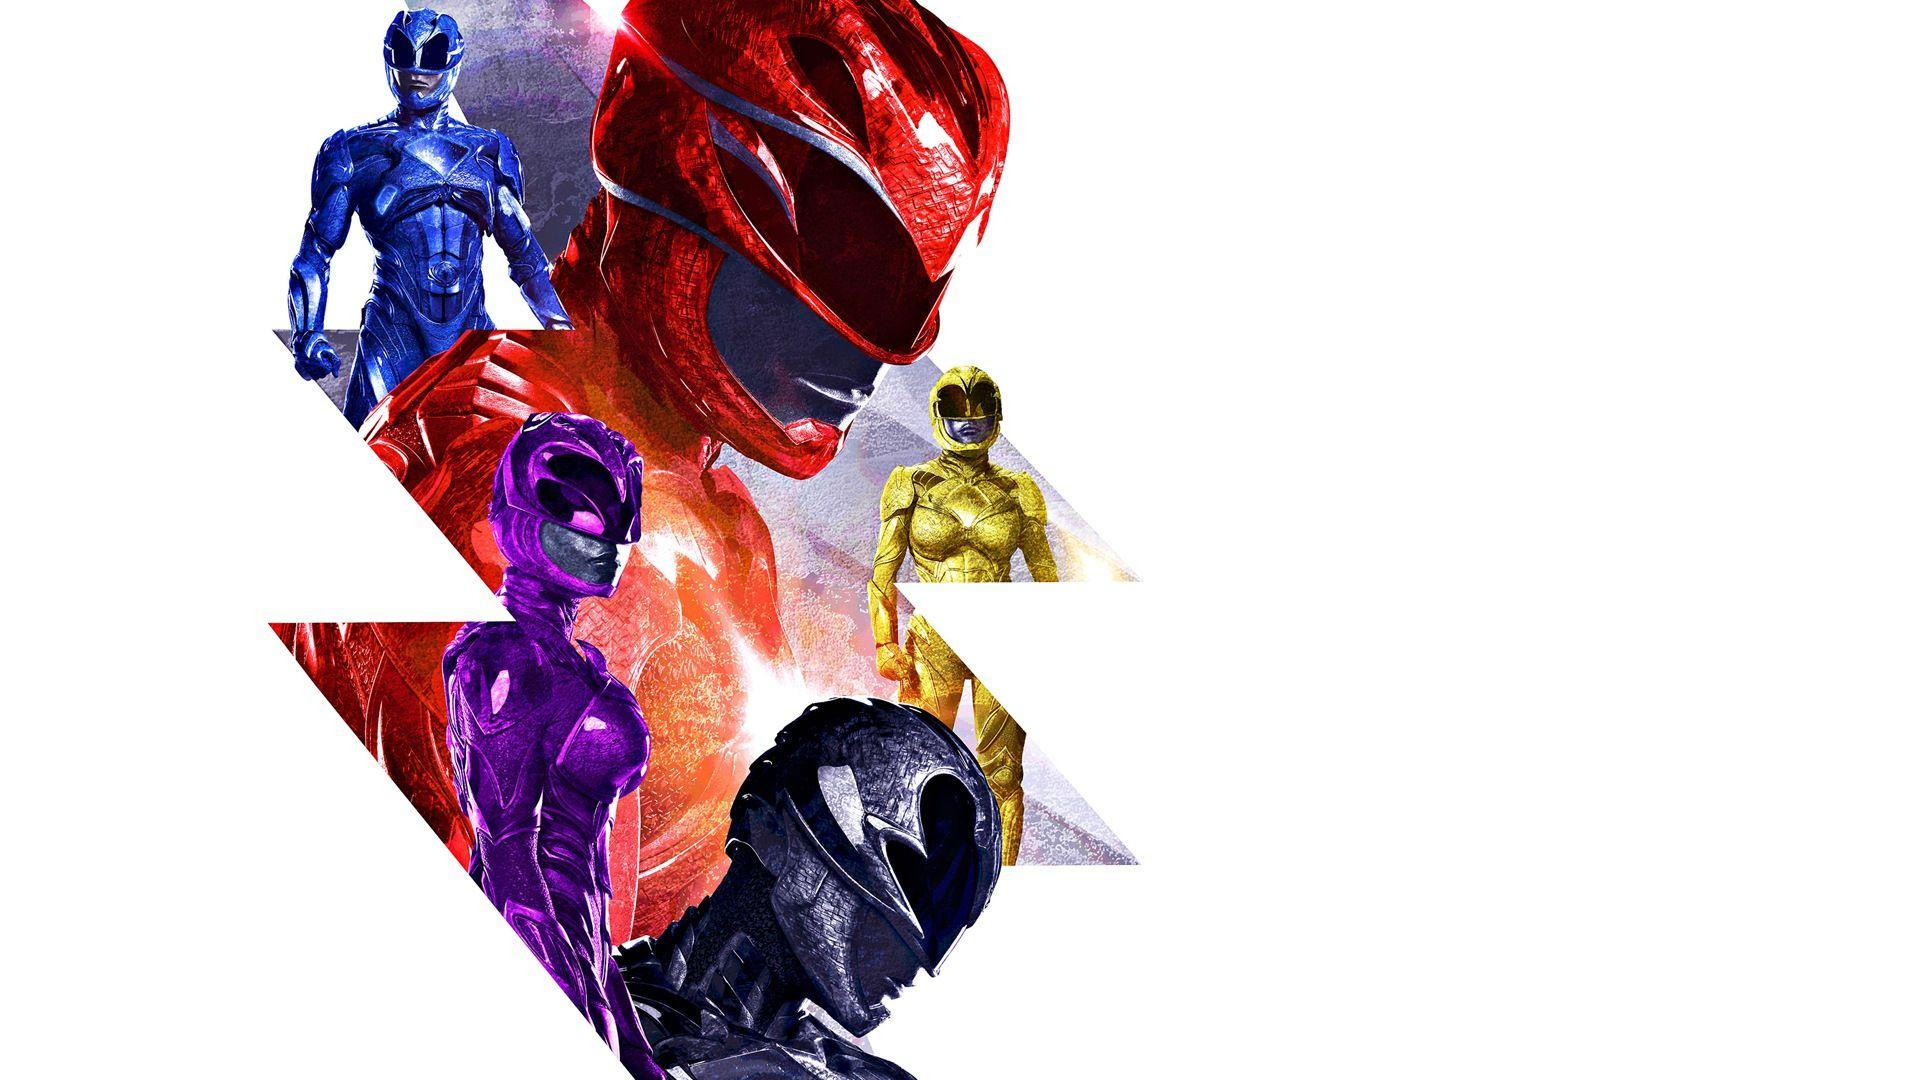 1920x1080 Power Rangers Movie Wallpapers Top Free Power Rangers Movie Backgrounds